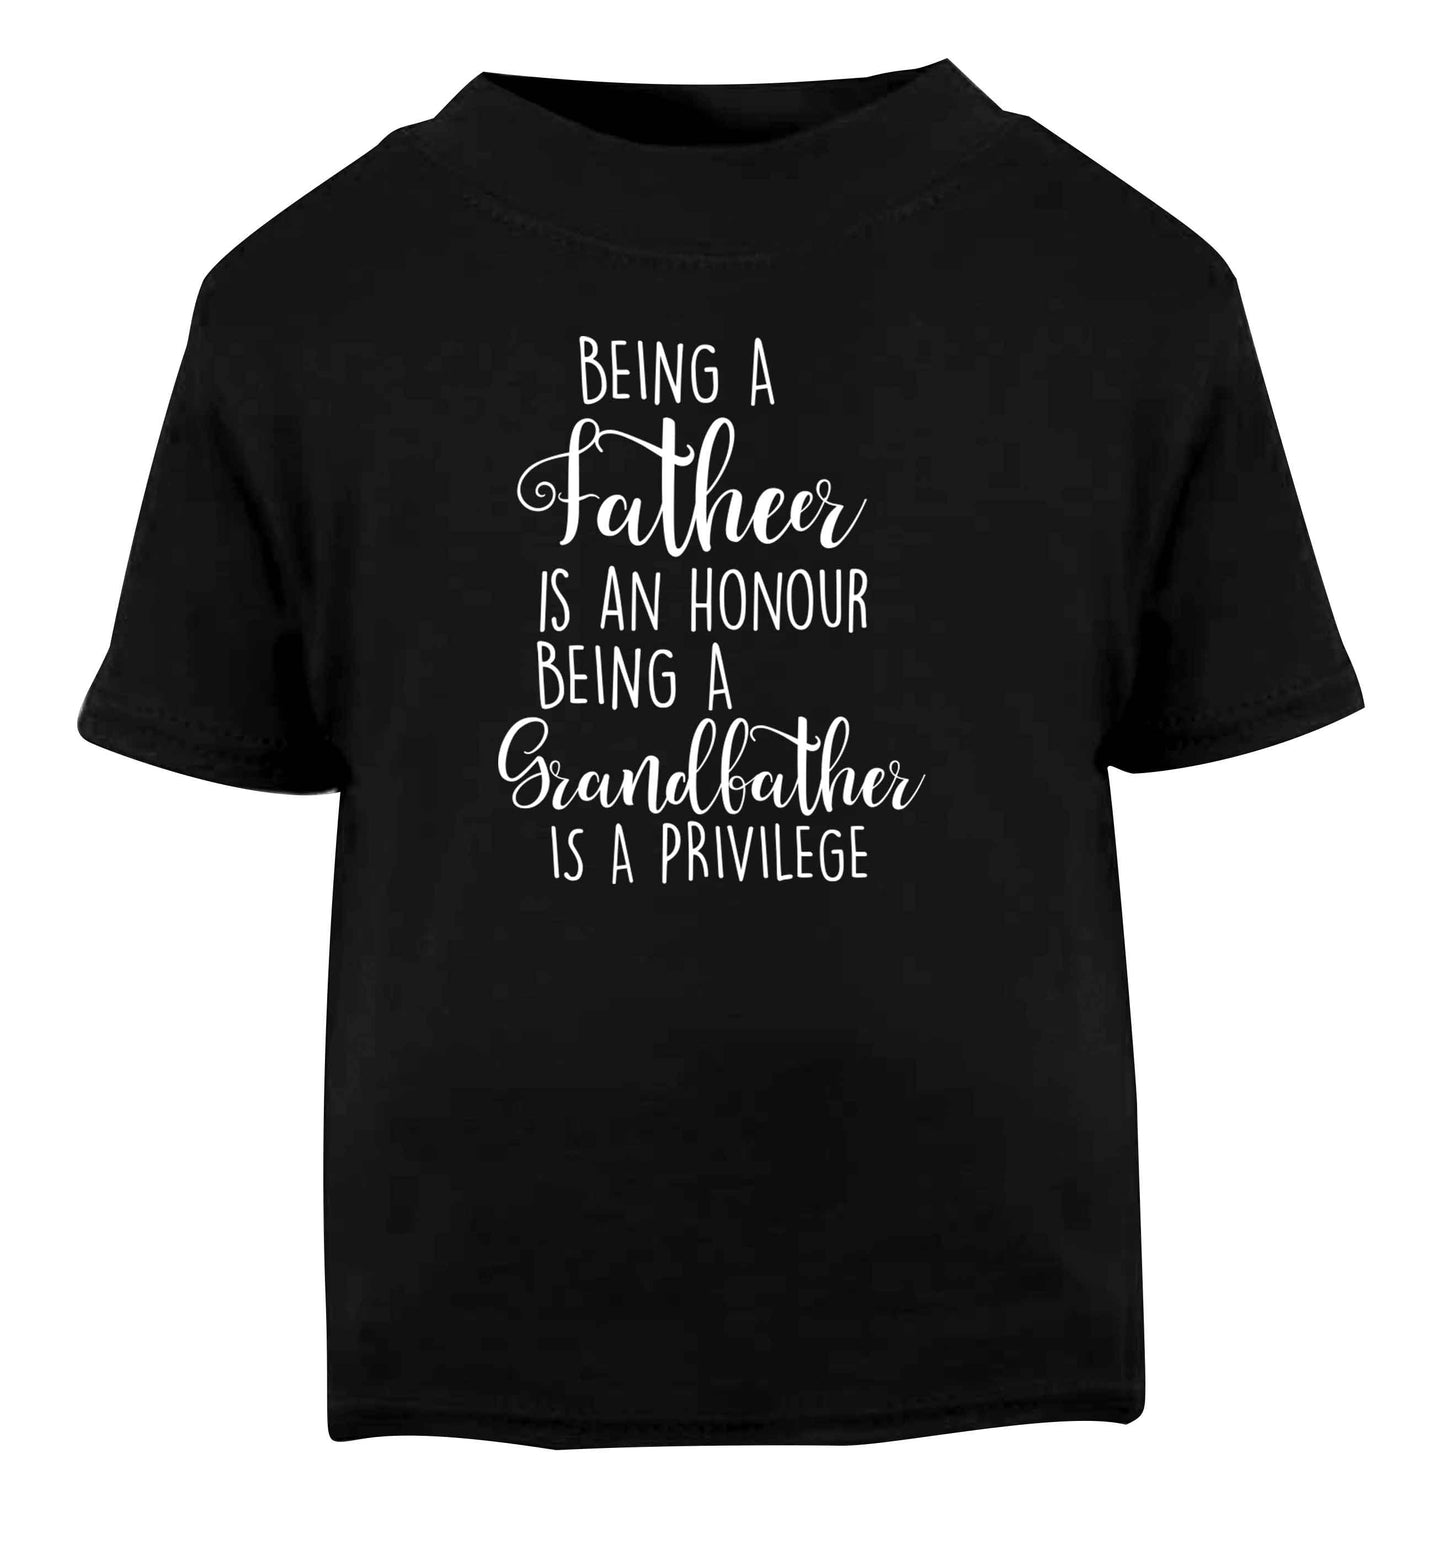 Being a father is an honour being a grandfather is a privilege Black Baby Toddler Tshirt 2 years